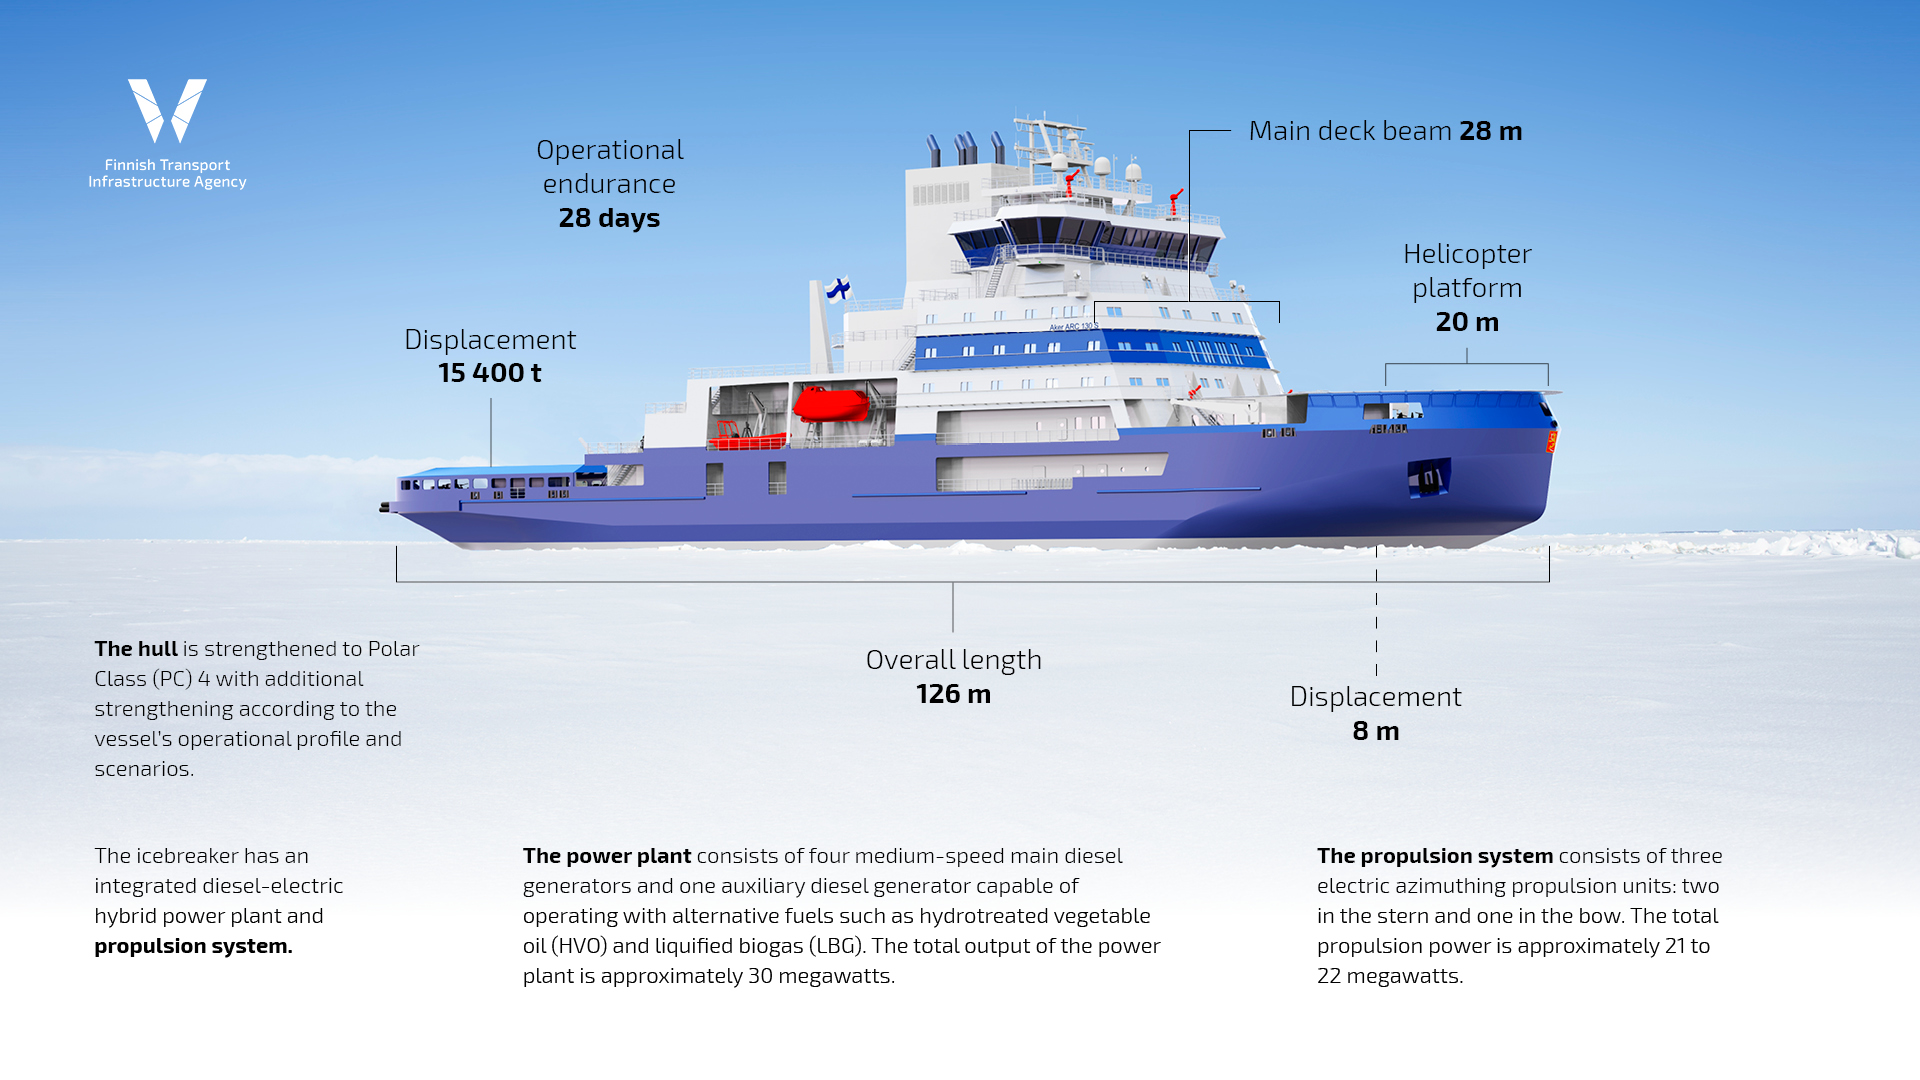 The hull is strengthened to Polar Class (PC) 4 with additional strengthening according to the vessel’s operational profile and scenarios.
The icebreaker has an integrated diesel-electric hybrid power plant and propulsion
system.
The power plant consists of four medium-speed main diesel generators and one
auxiliary diesel generator capable of operating with alternative fuels such as
hydrotreated vegetable oil (HVO), liquified biogas (LBG). The
total output of the power plant is approximately 30 megawatts.
The propulsion system consists of three electric azimuthing propulsion units: two
in the stern and one in the bow. The total propulsion power is approximately 21 to
22 megawatts.
The overall operational endurance of the icebreaker is 28 days.